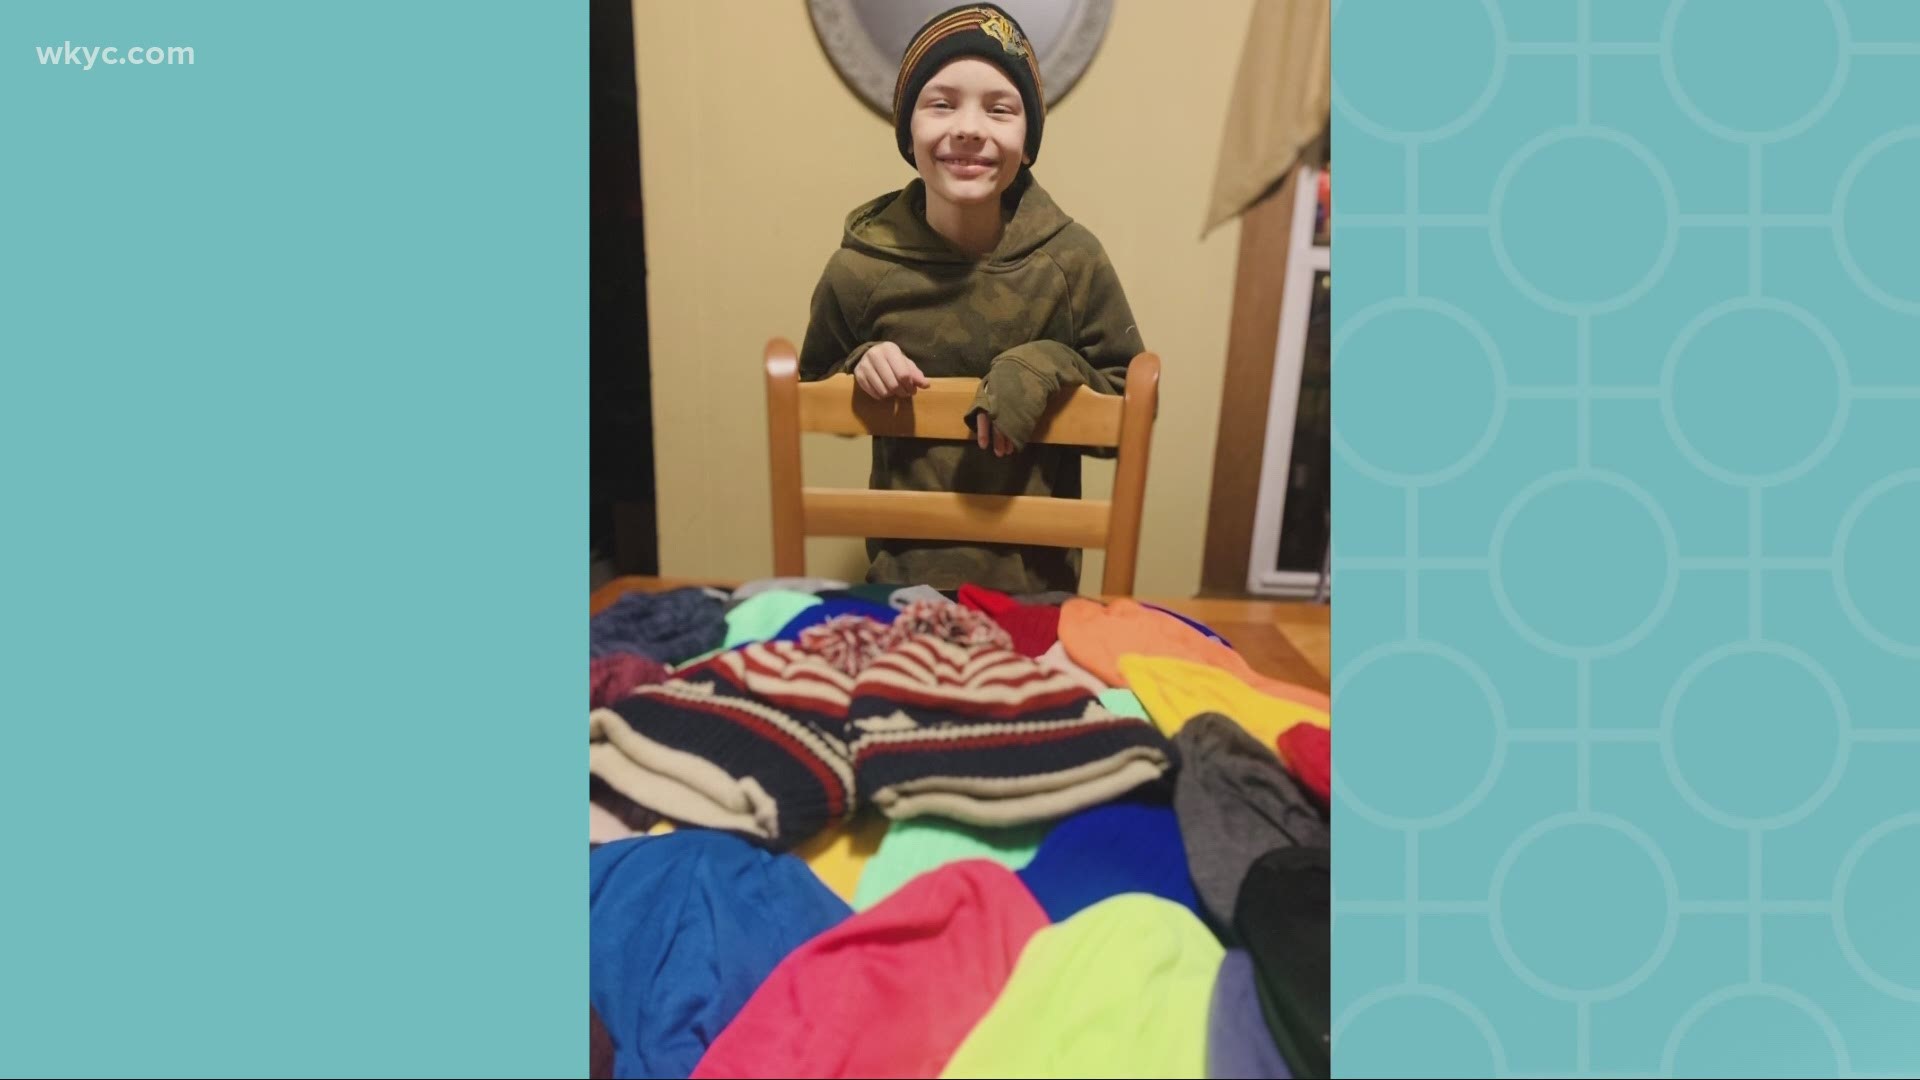 Carson Thatcher got some really bad news on his 10th birthday, but his condition is inspiring him to give back to others. Lindsay Buckingham shares his story.